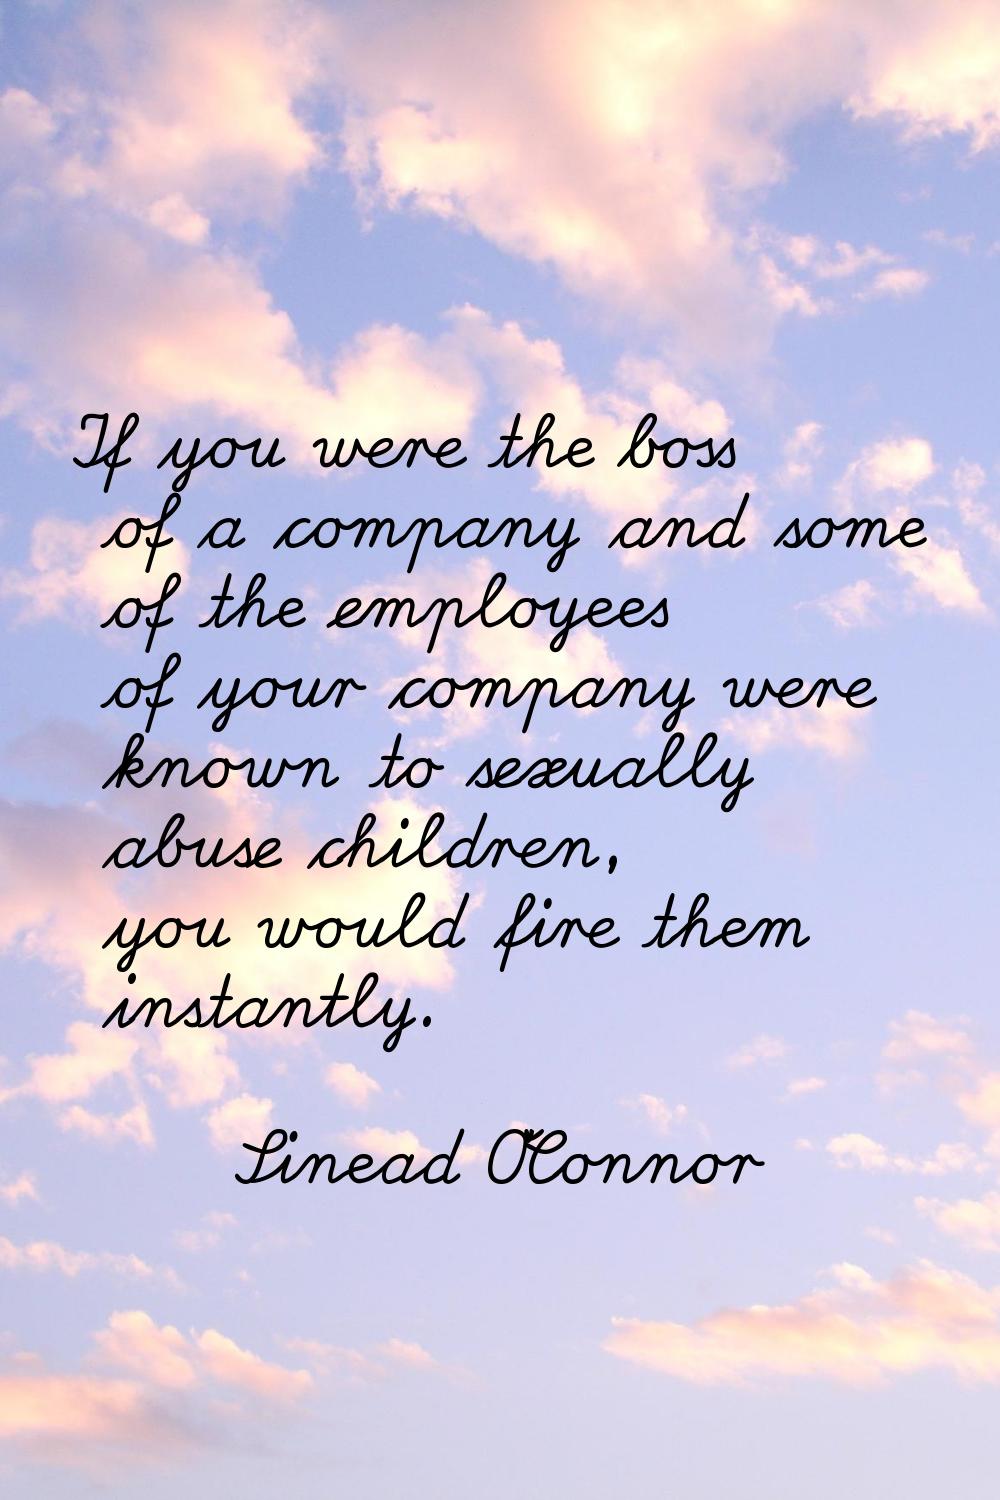 If you were the boss of a company and some of the employees of your company were known to sexually 